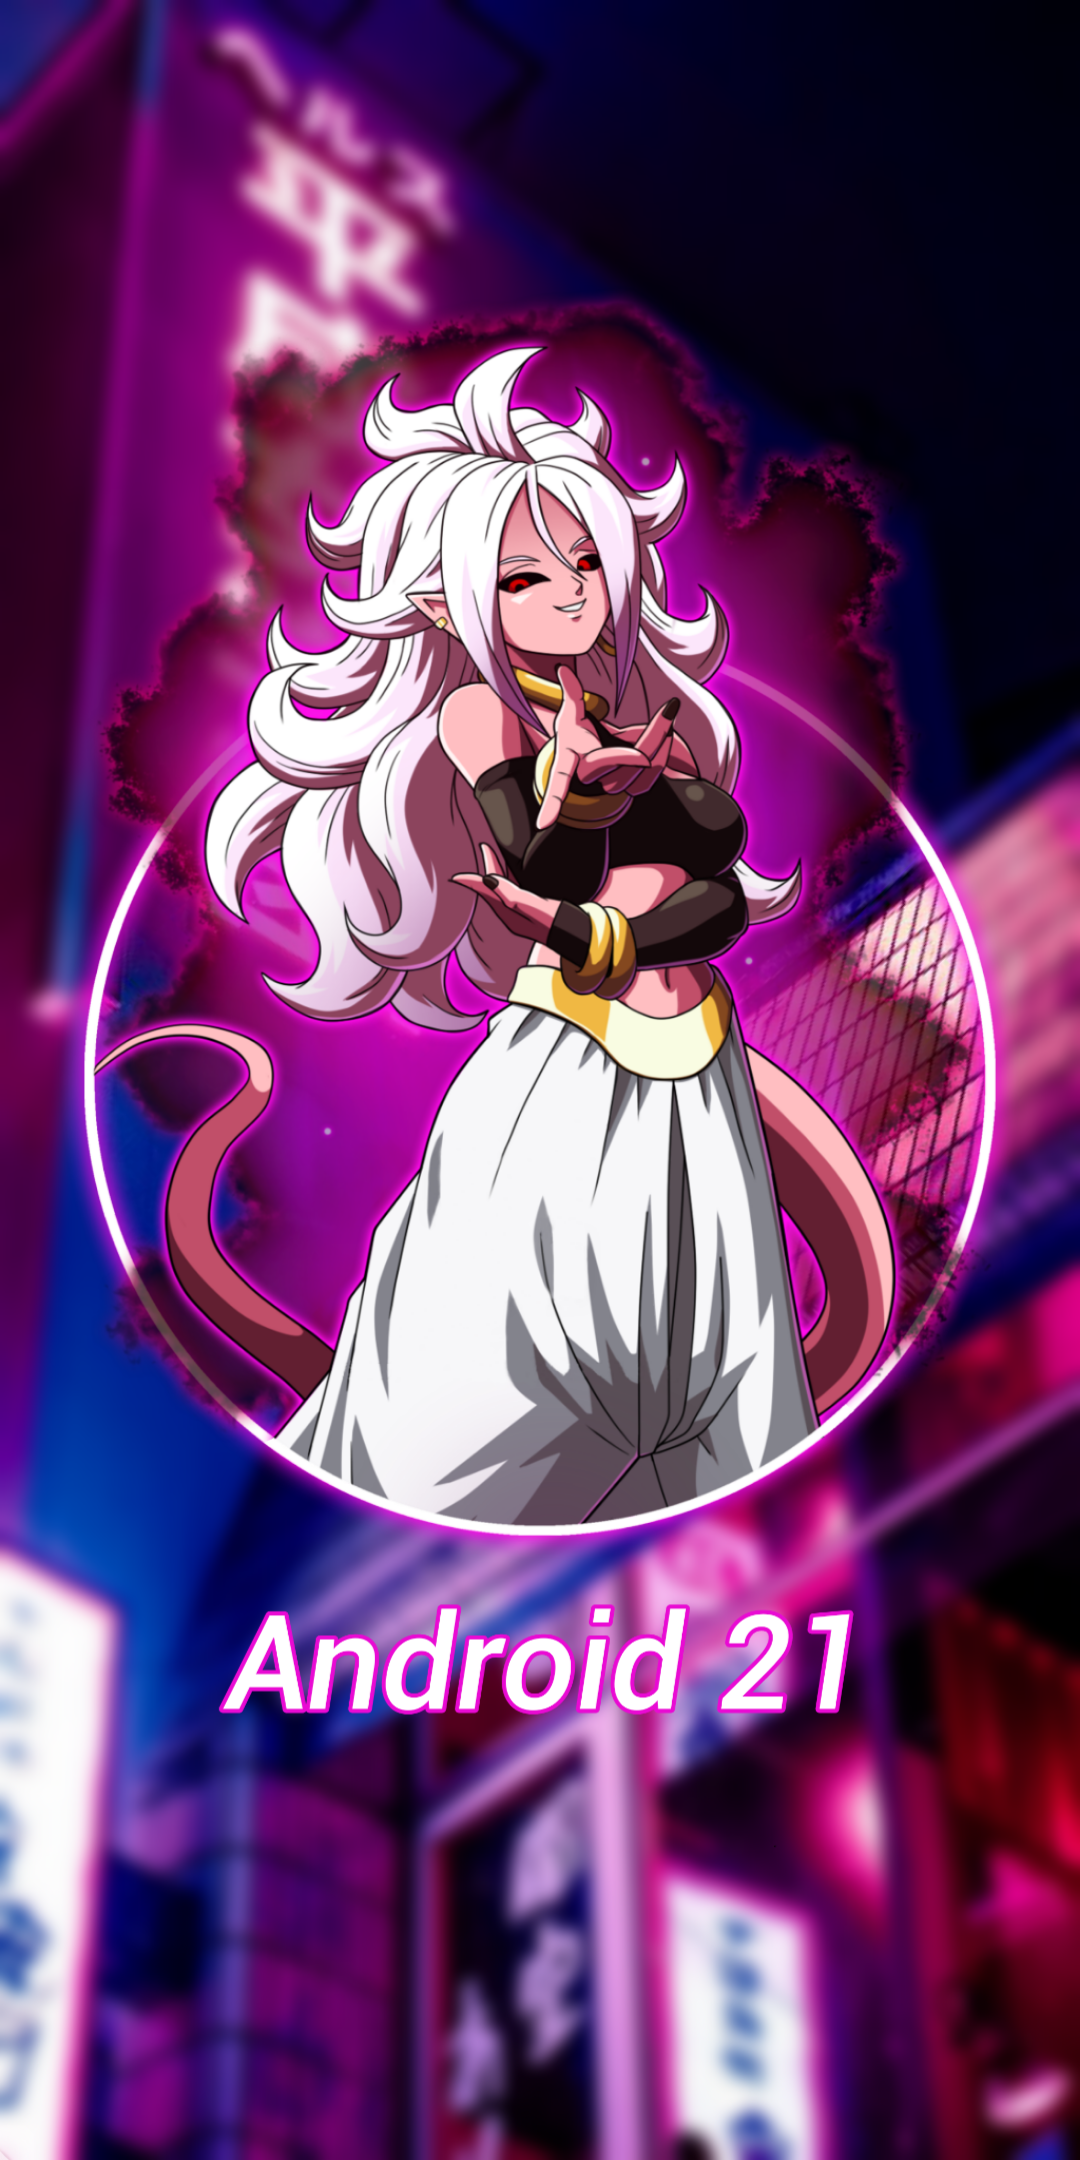 Just a quick edit of Android 21 that I made on my phone